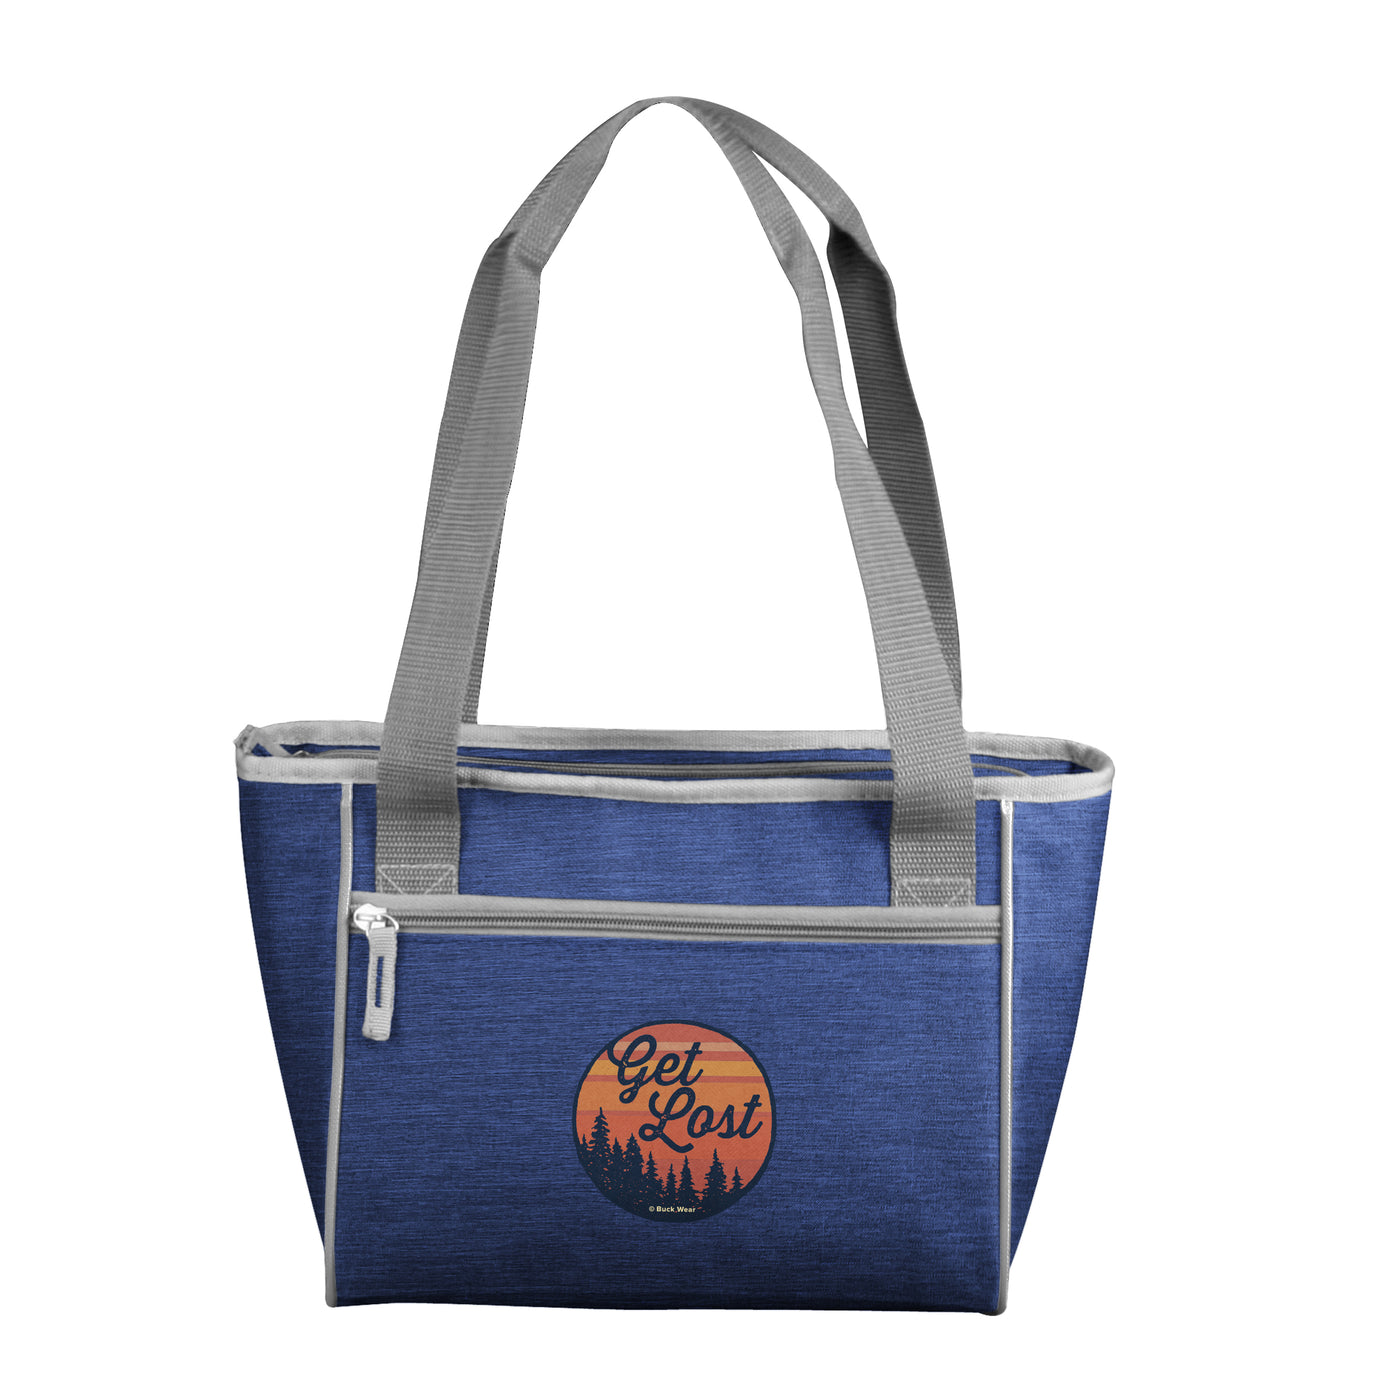 Get Lost 16 Can Cooler Tote